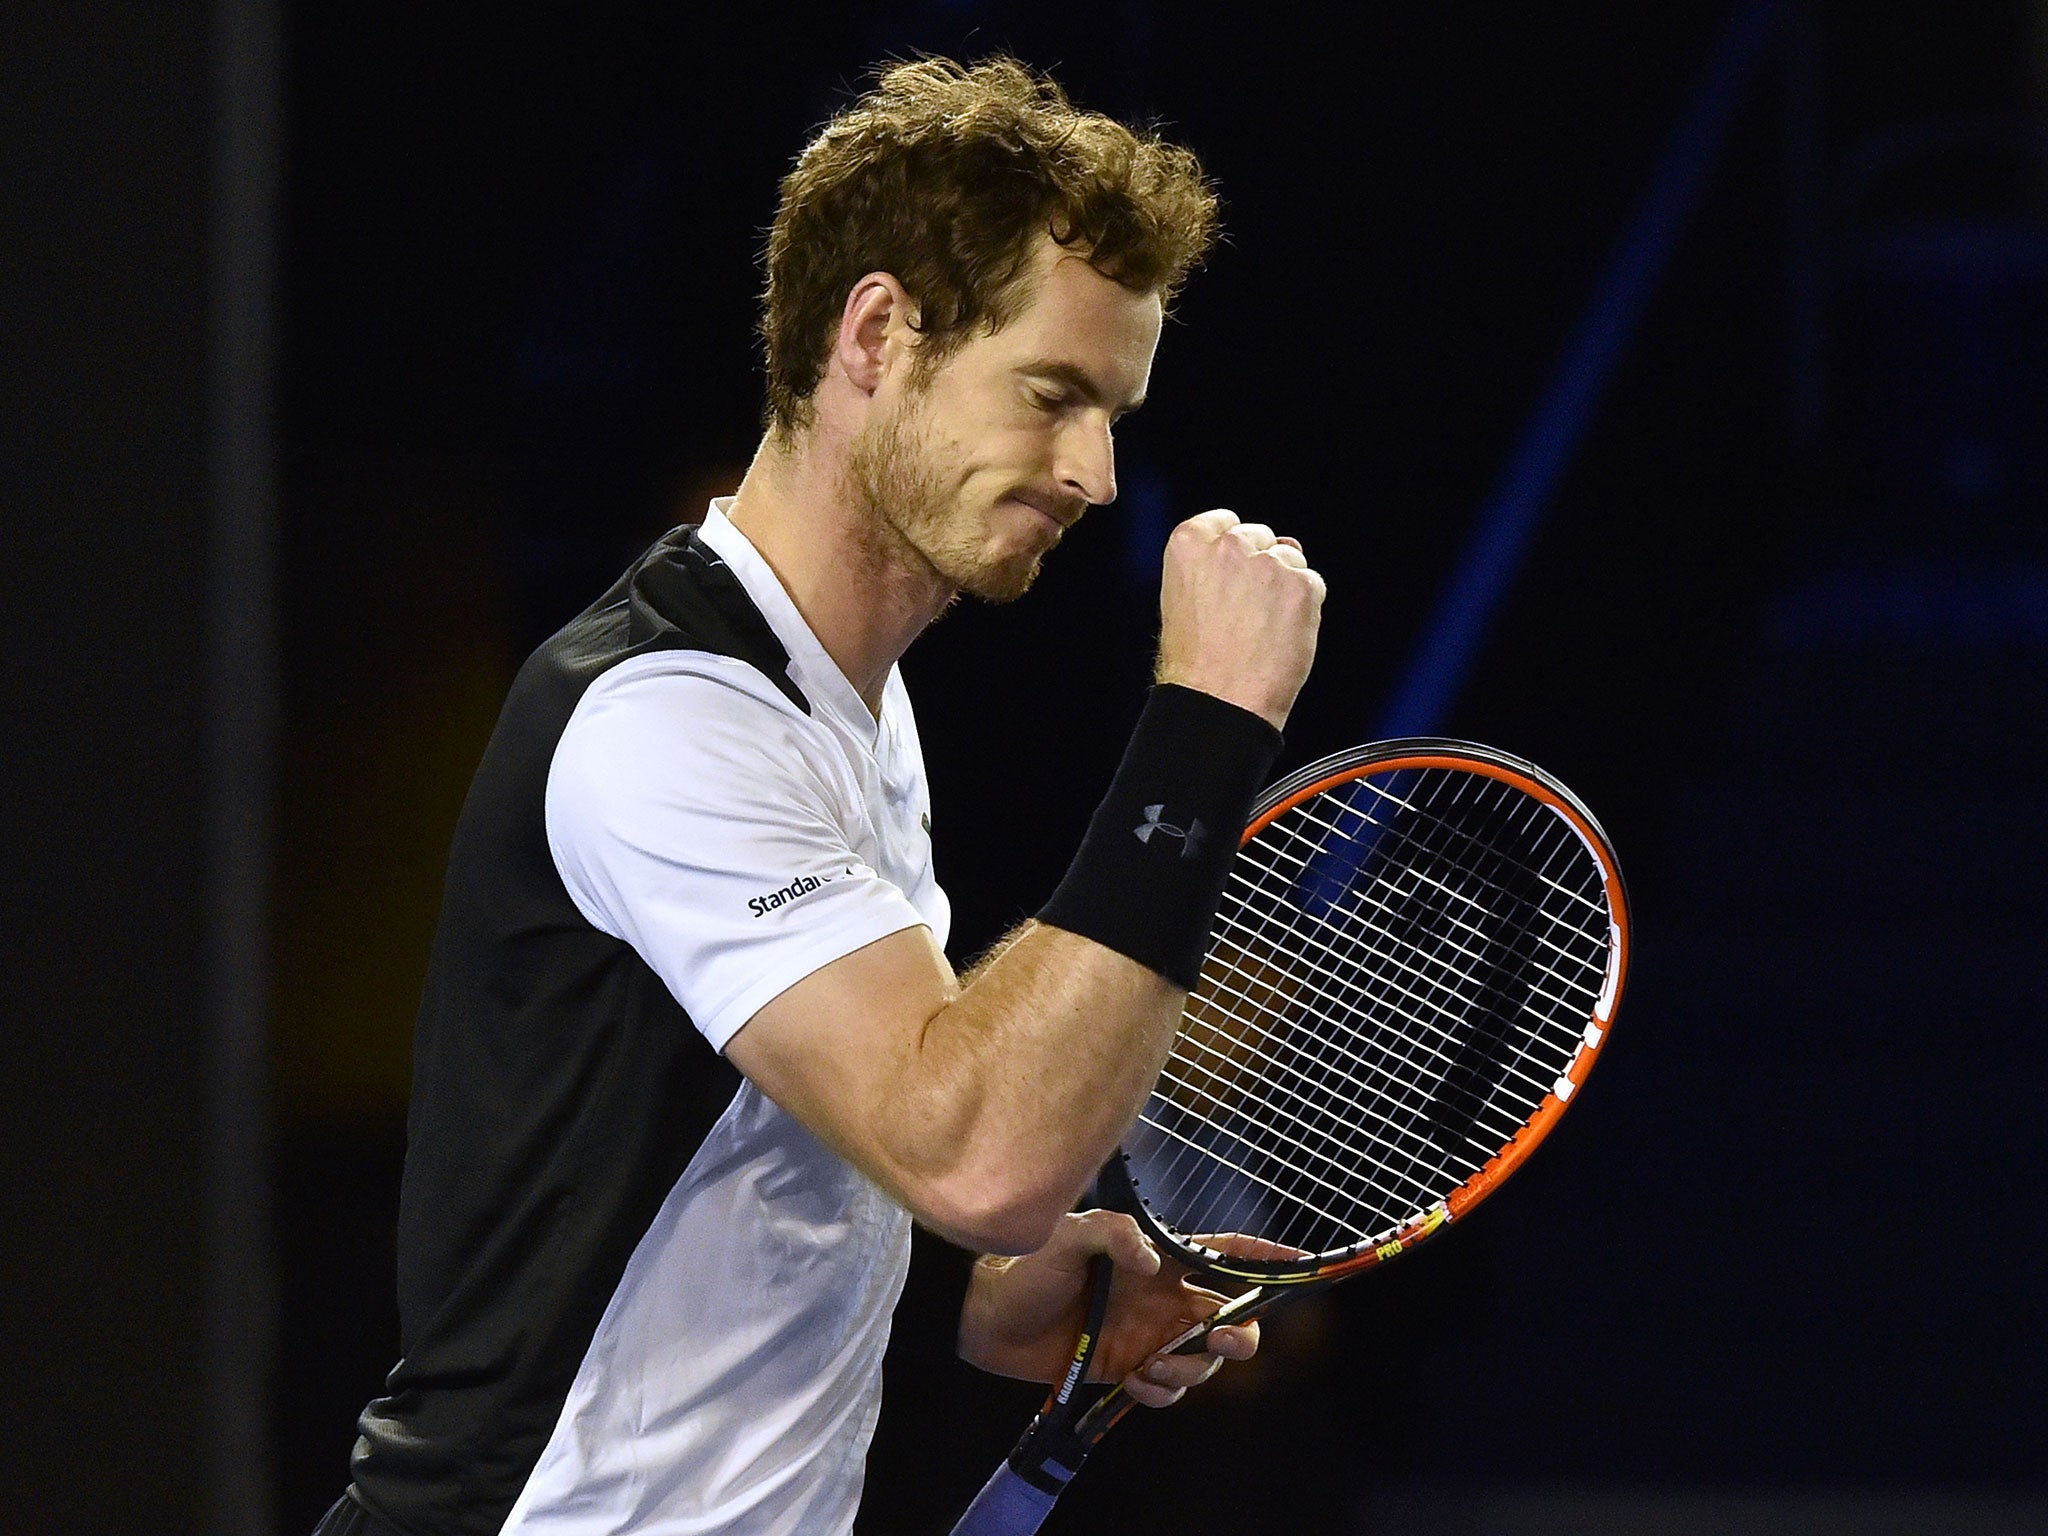 Andy Murray gestures after winning the second set against Milos Raonic